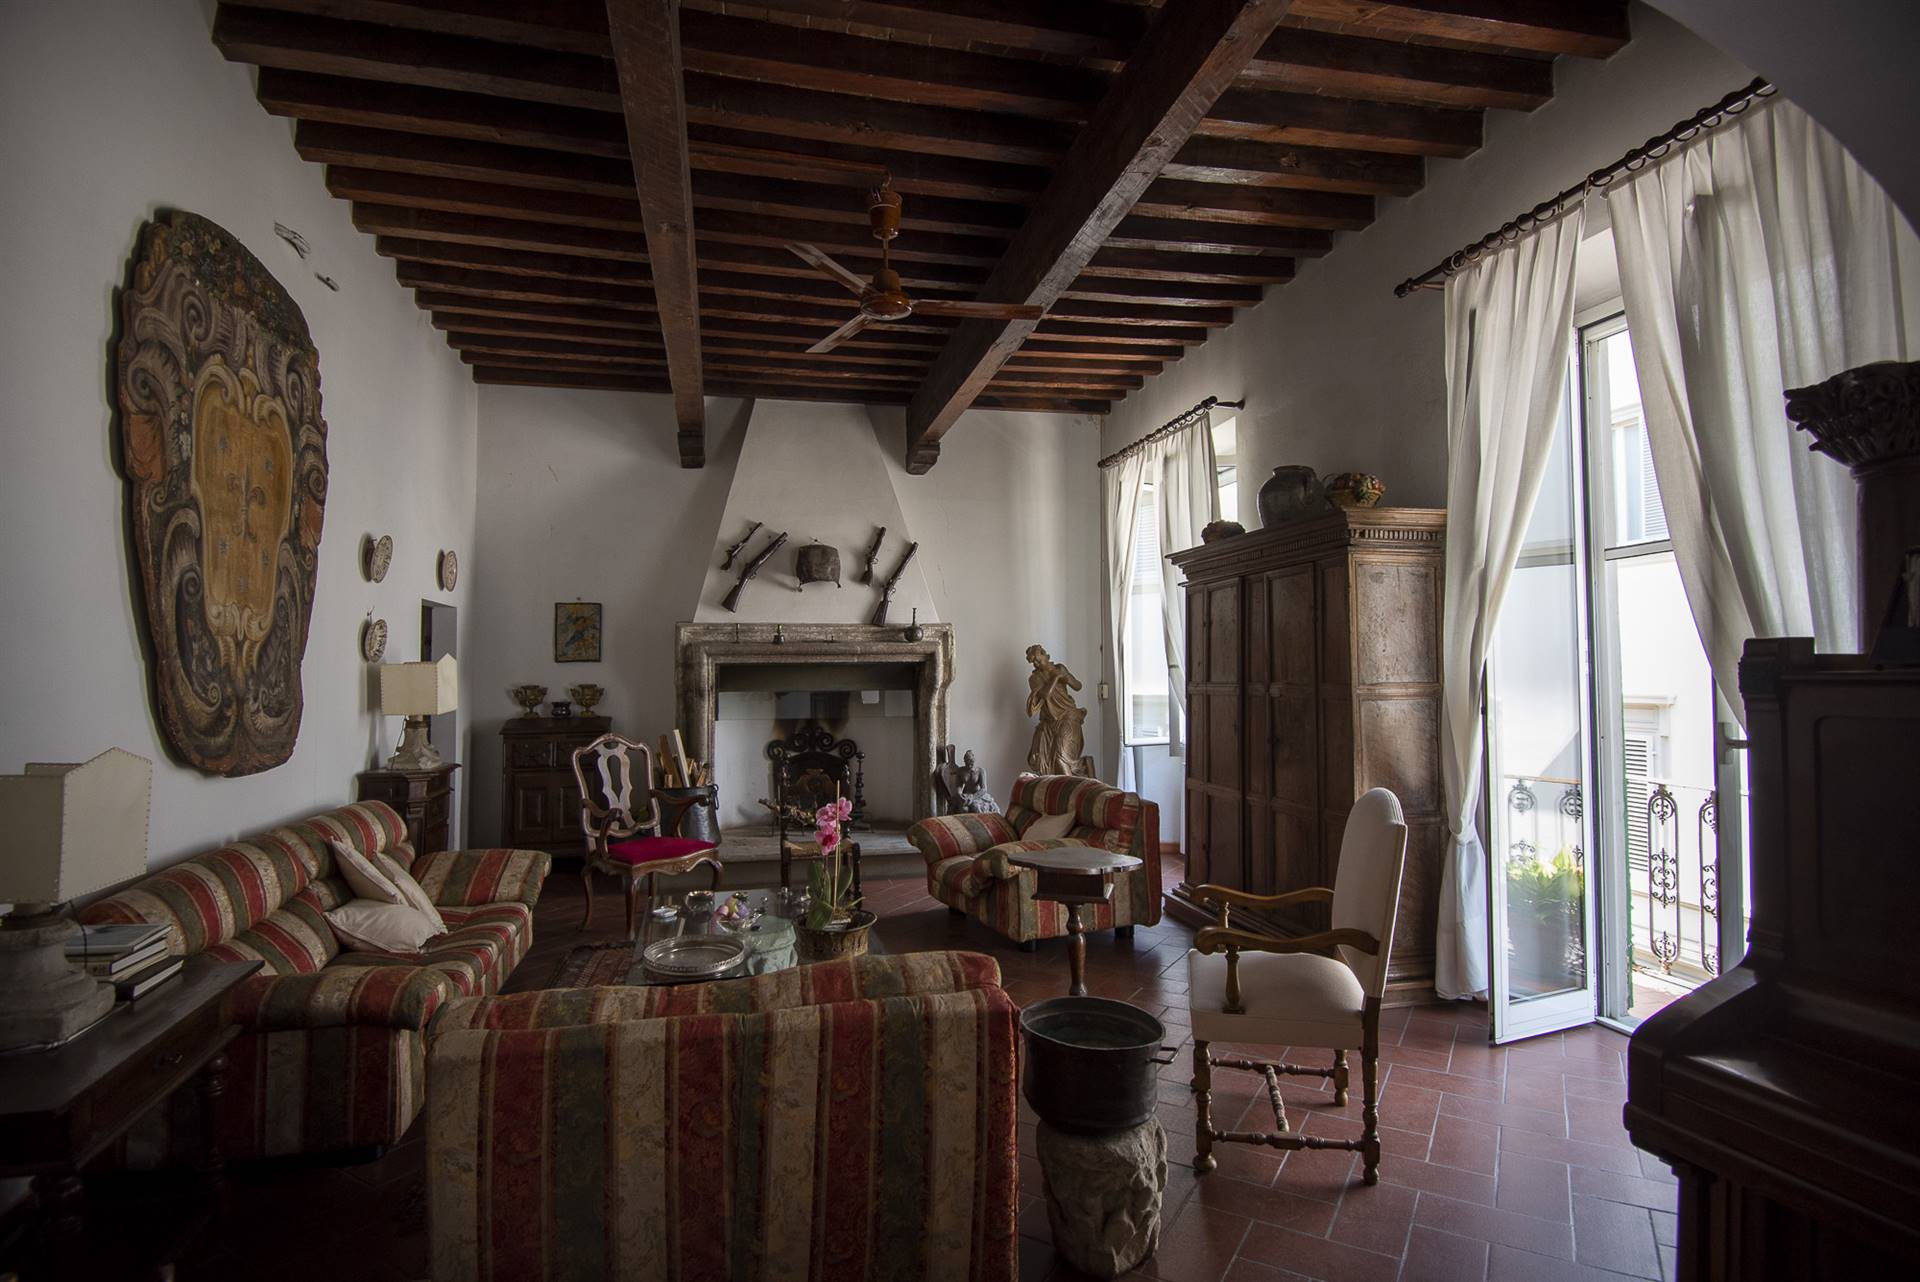 BORGO OGNISSANTI, FIRENZE, Apartment for sale of 270 Sq. mt., Habitable, Heating Individual heating system, Energetic class: G, Epi: 230 kwh/m2 year, 